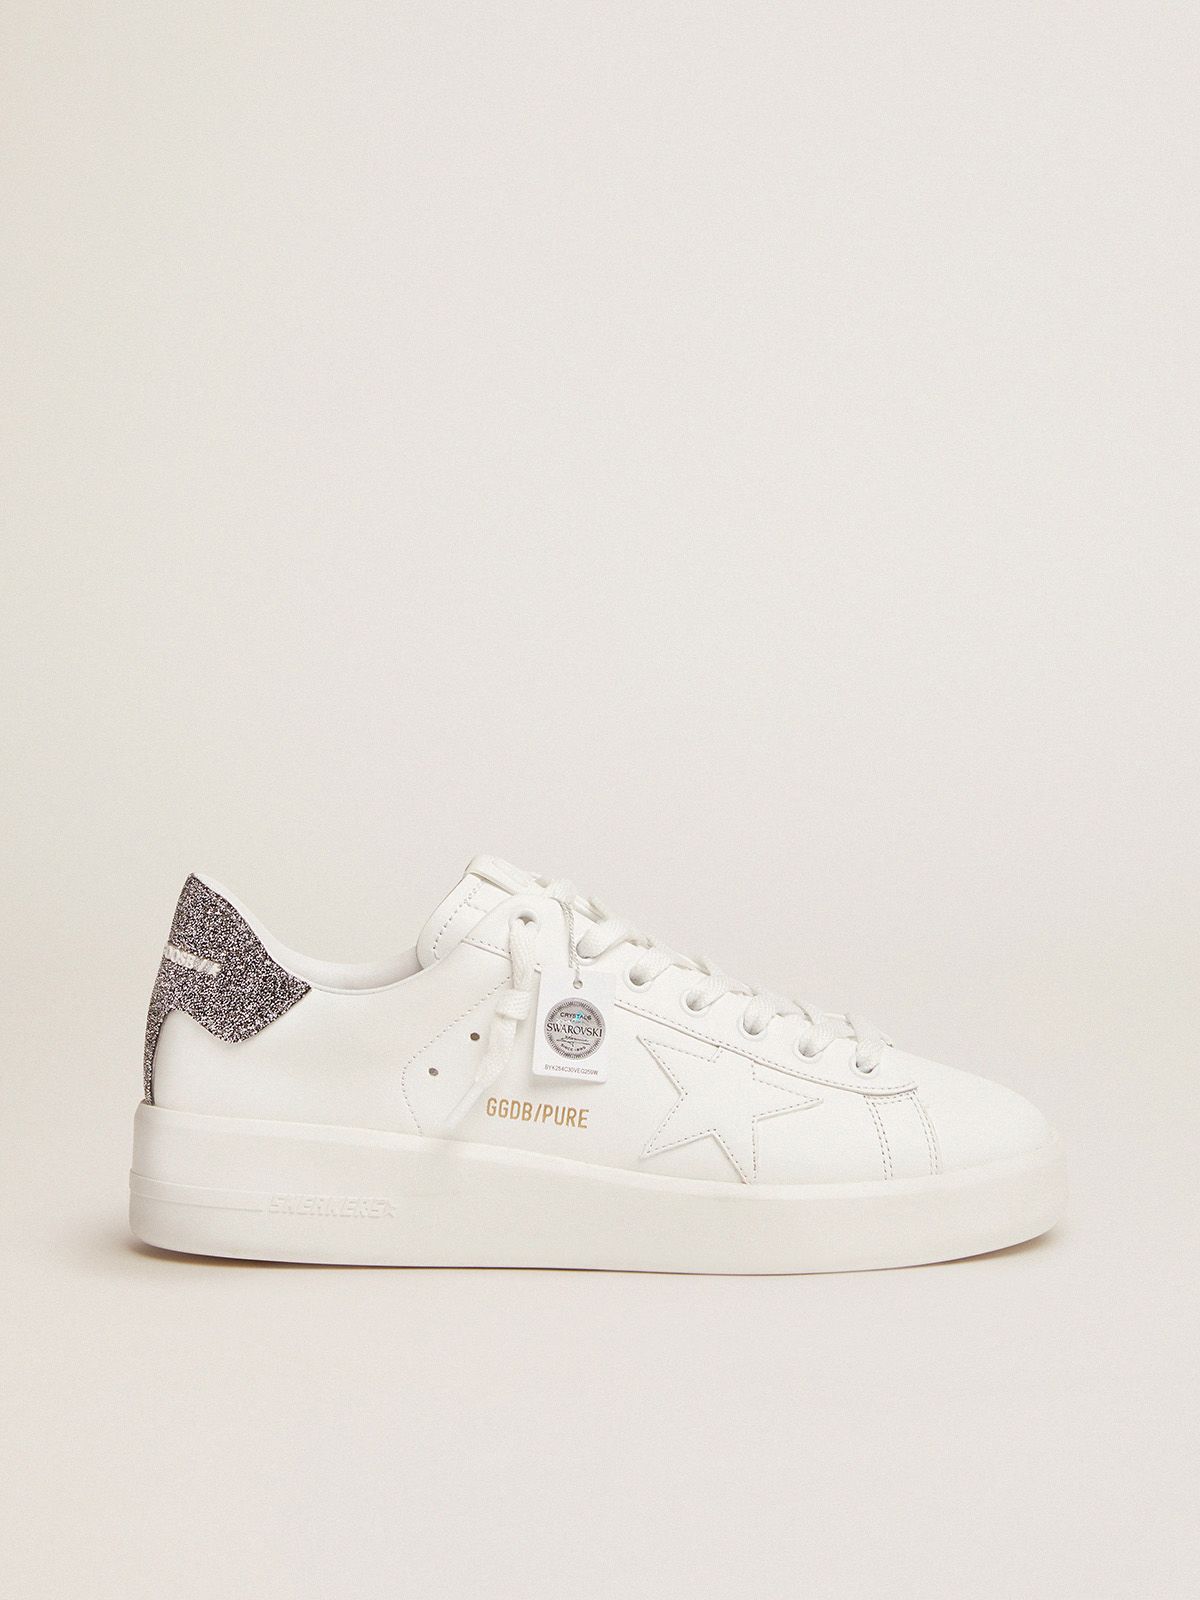 golden goose crystal in silver sneakers with Purestar tab heel white leather